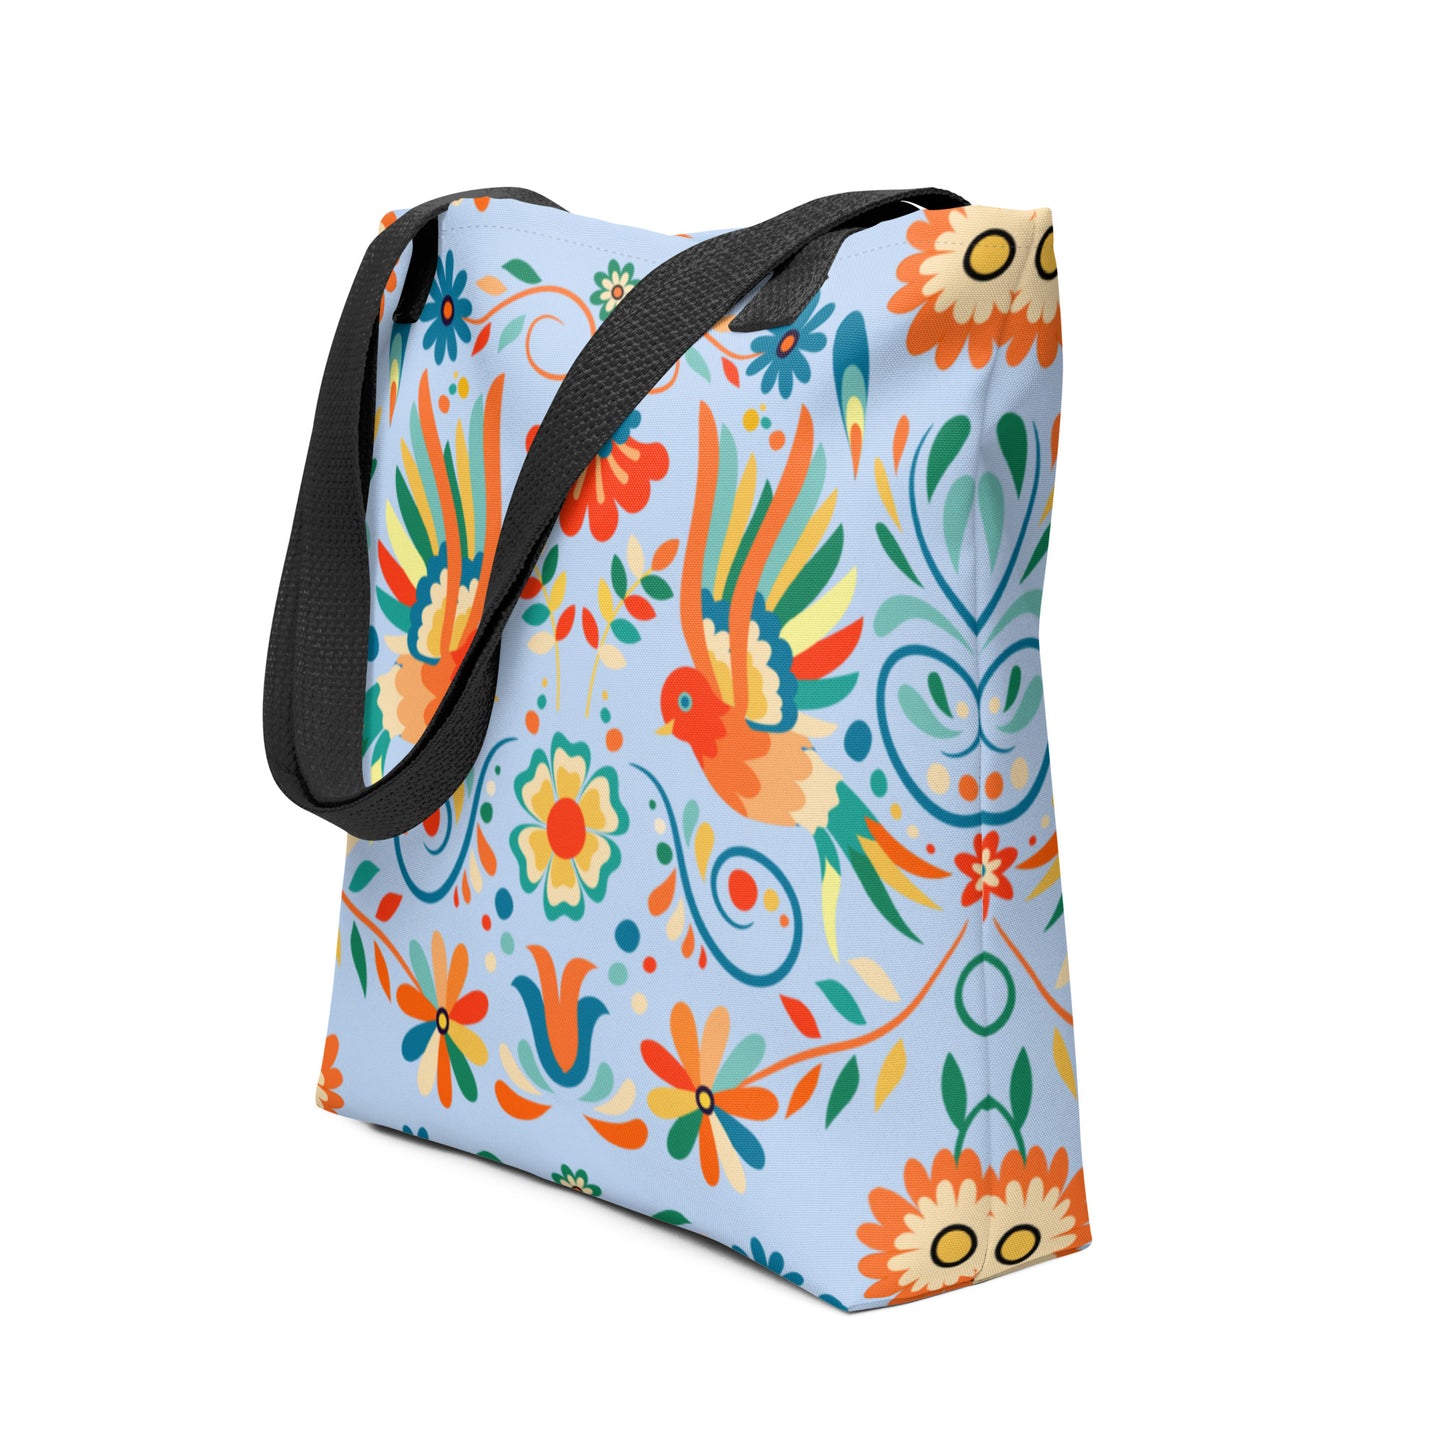 Mexican Otomi Print Tote Bag